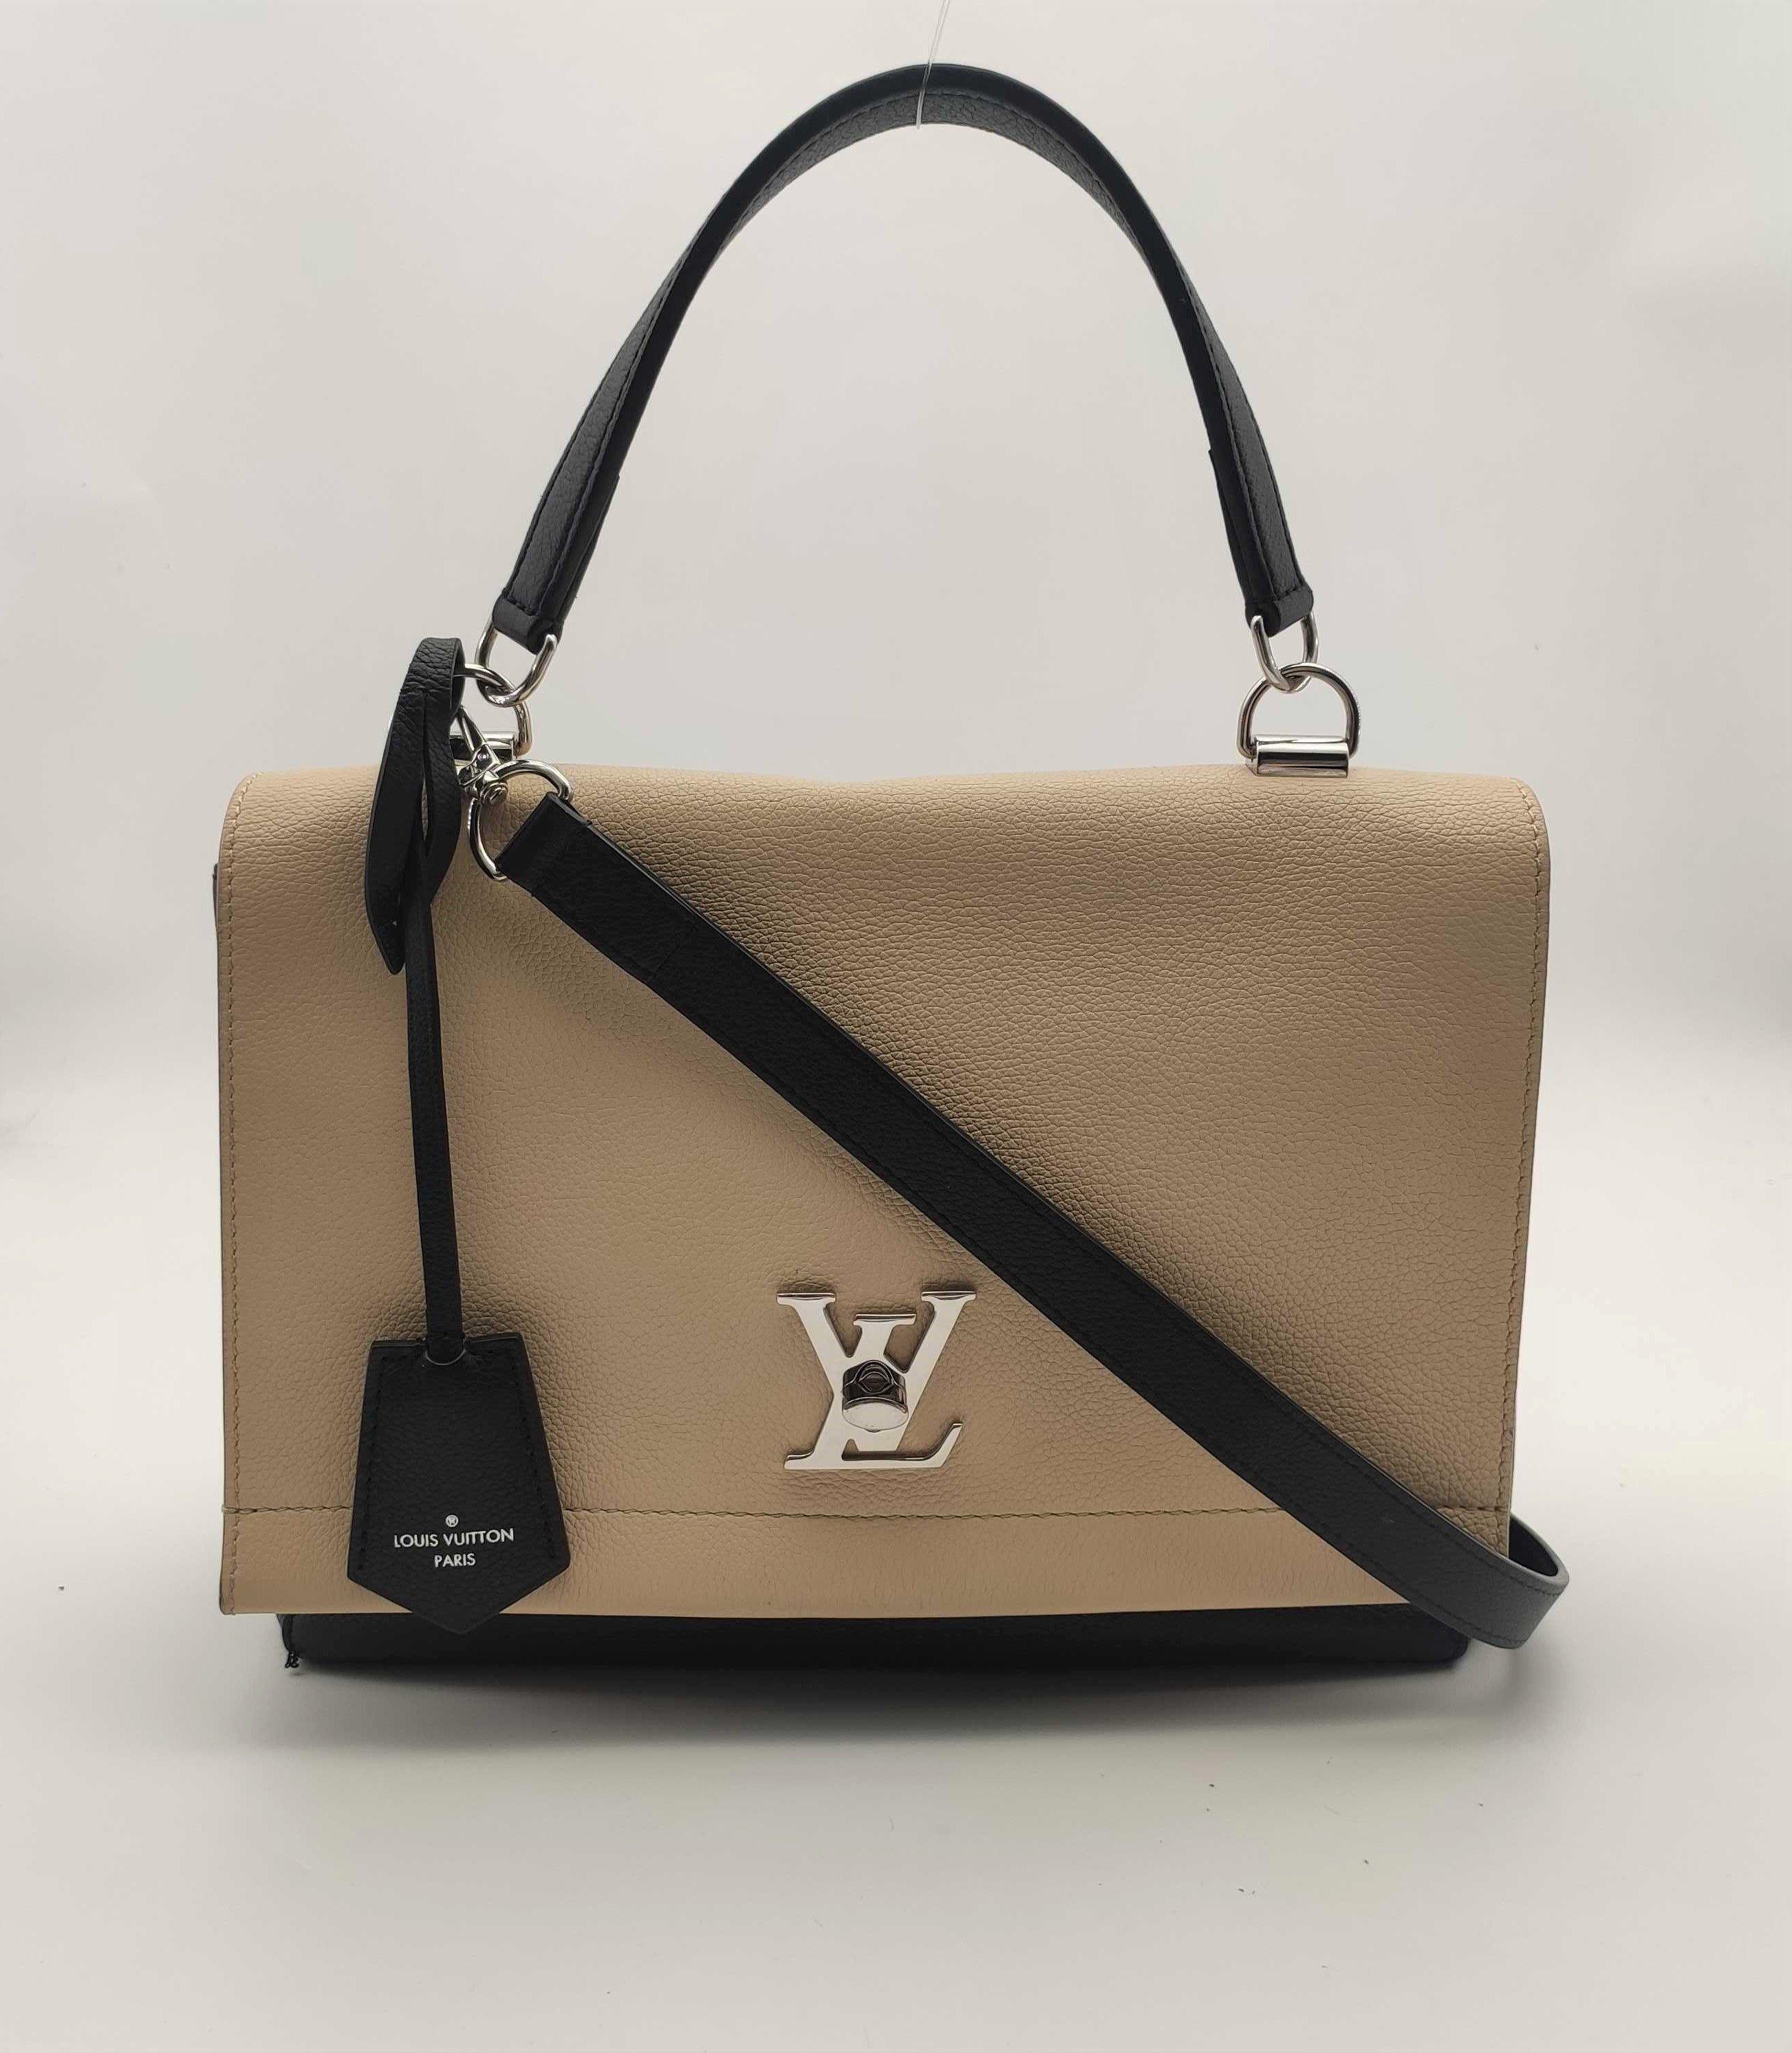 - Designer: LOUIS VUITTON
- Model: Lockme
- Condition: Very good condition. Exterior stains, Sign of wear on Leather, Interior stains
- Accessories: None
- Measurements: Width: 29cm, Height: 21cm, Depth: 9.5cm, Strap: 104cm
- Exterior Material: